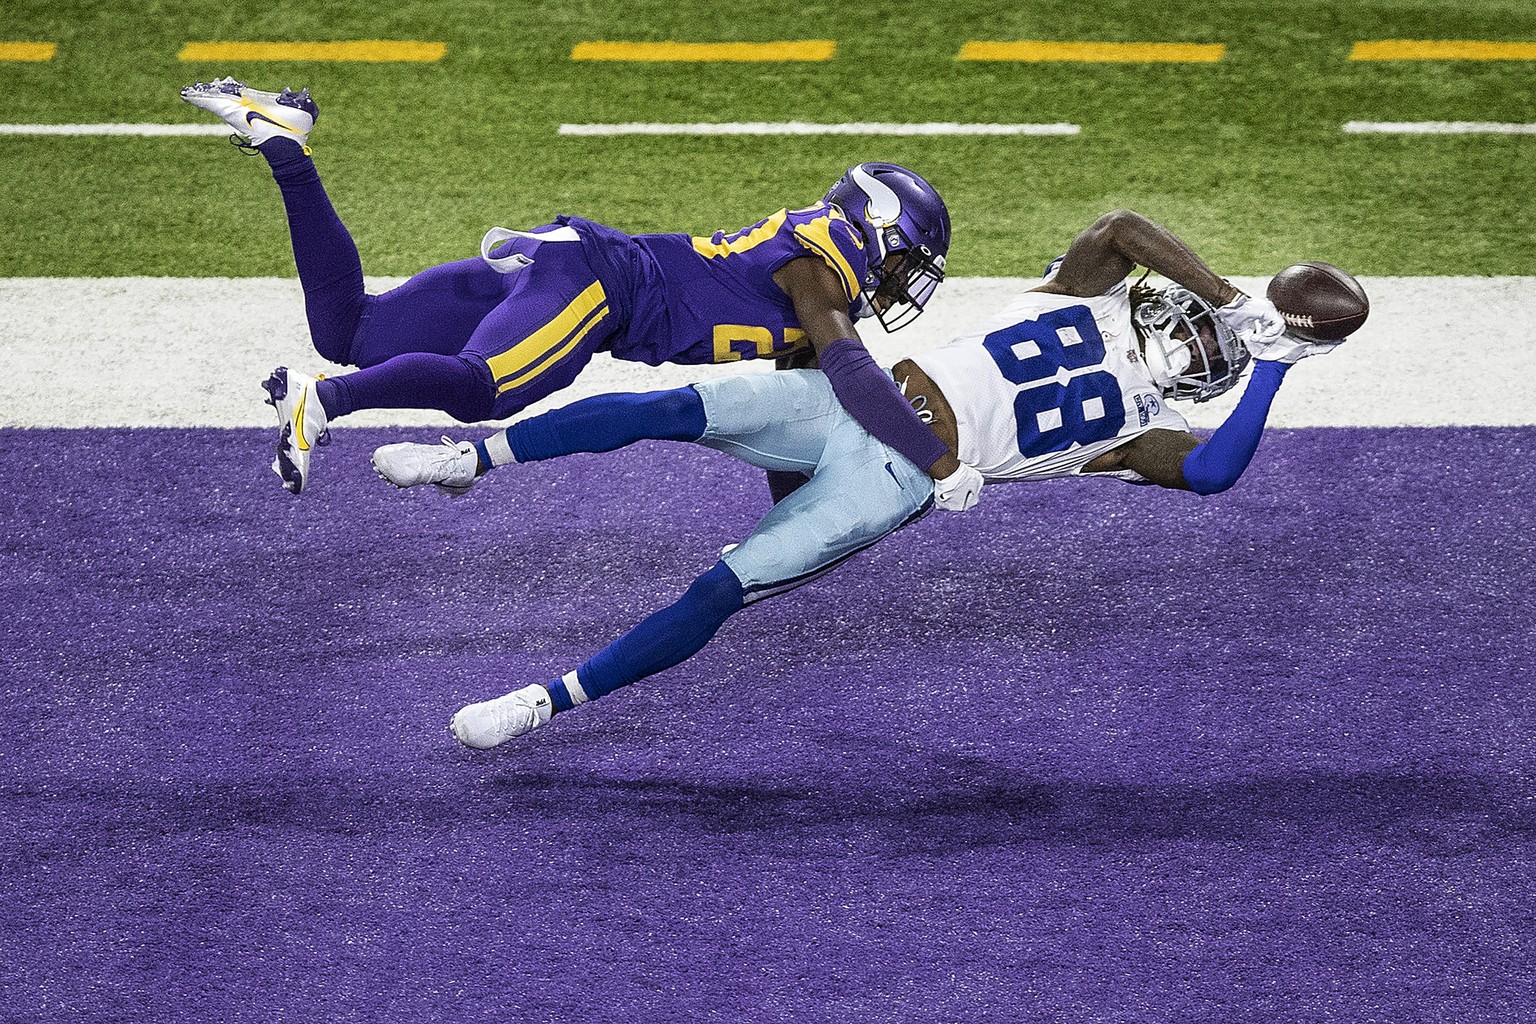 Dallas Cowboys wide receiver CeeDee Lamb (88) catches a second-quarter touchdown pass over Minnesota Vikings cornerback Jeff Gladney (20) during an NFL football game, Sunday, Nov. 22, 2020, in Minneap ...